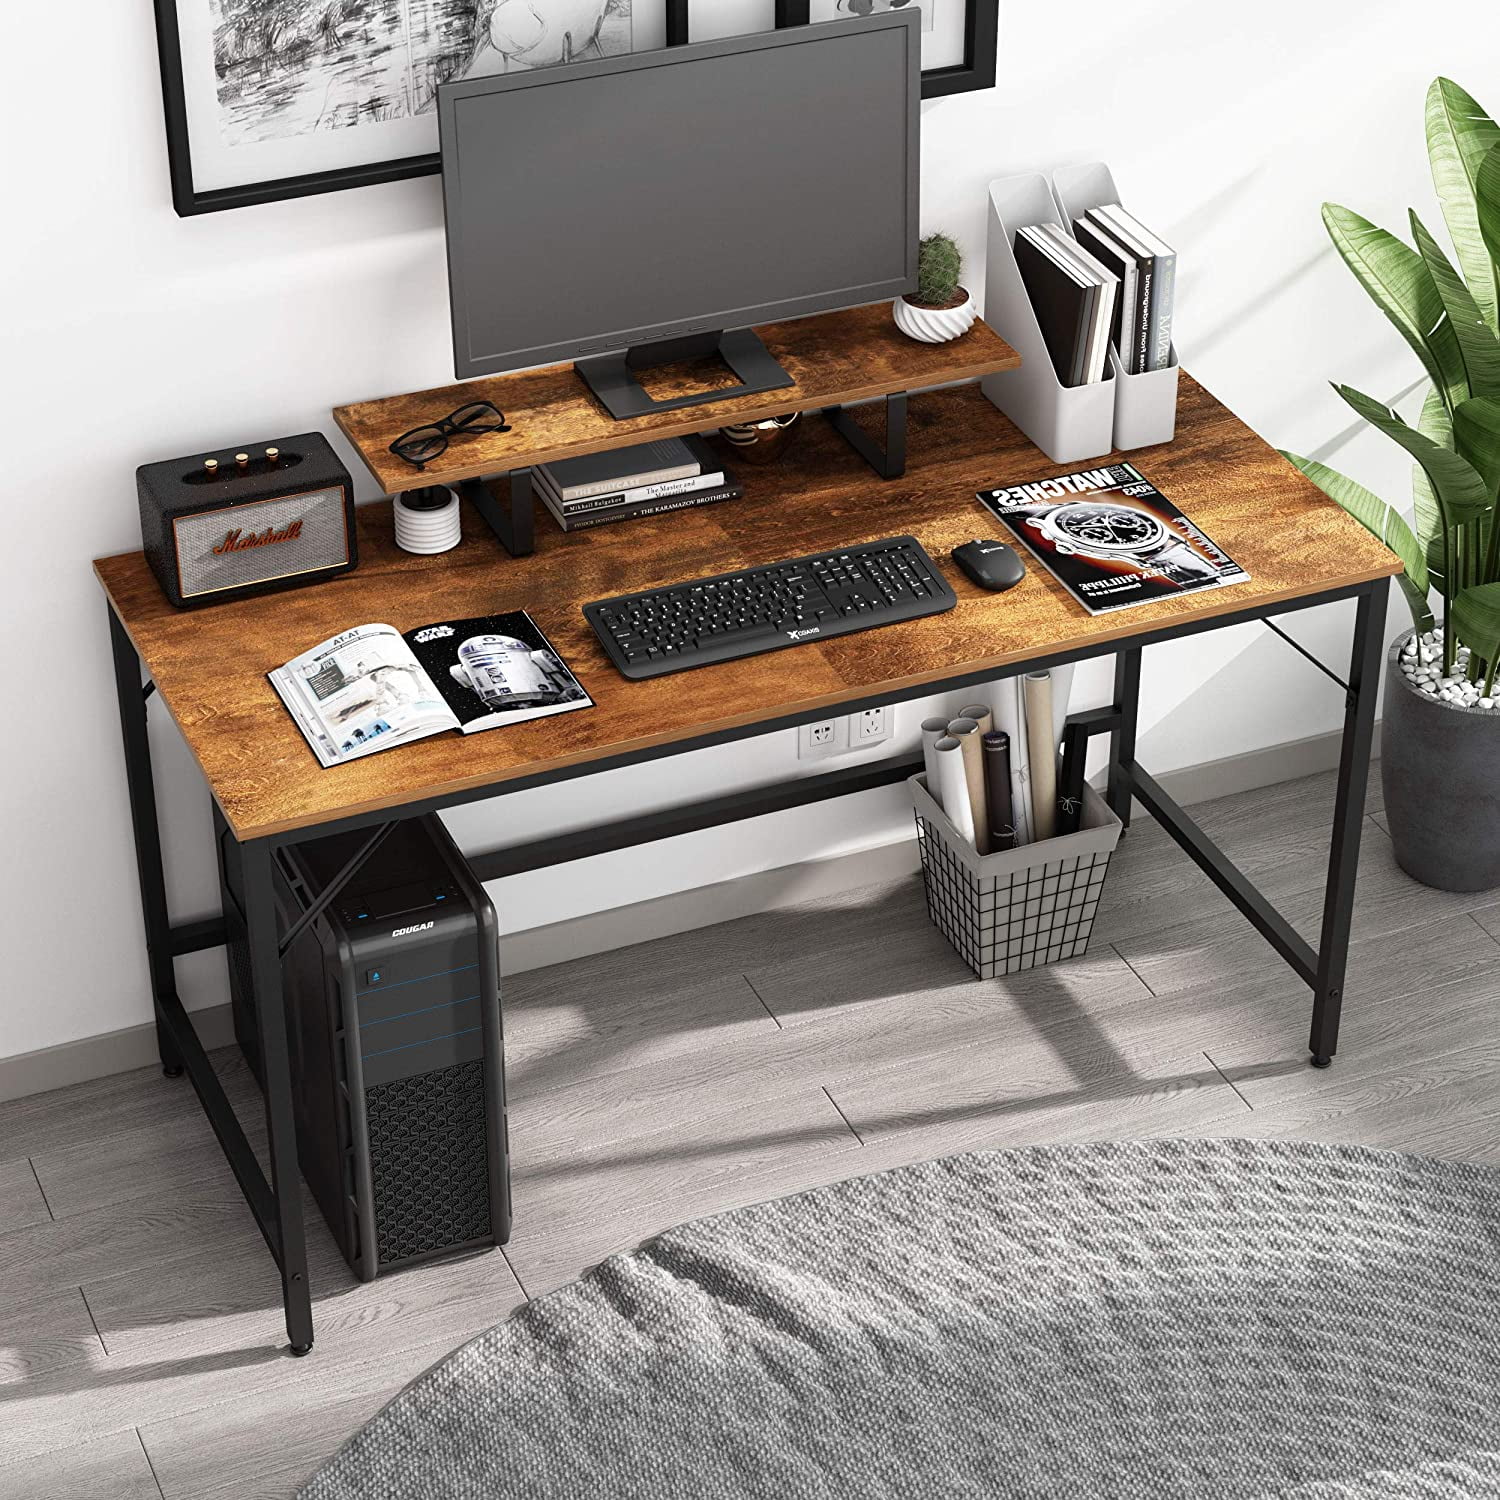 JOISCOPE Computer Desk Vintage Oak Finish Laptop Desk with Storage Shelves ，Wood and Metal,Industrial Table for Home Office,47inches,120cm 